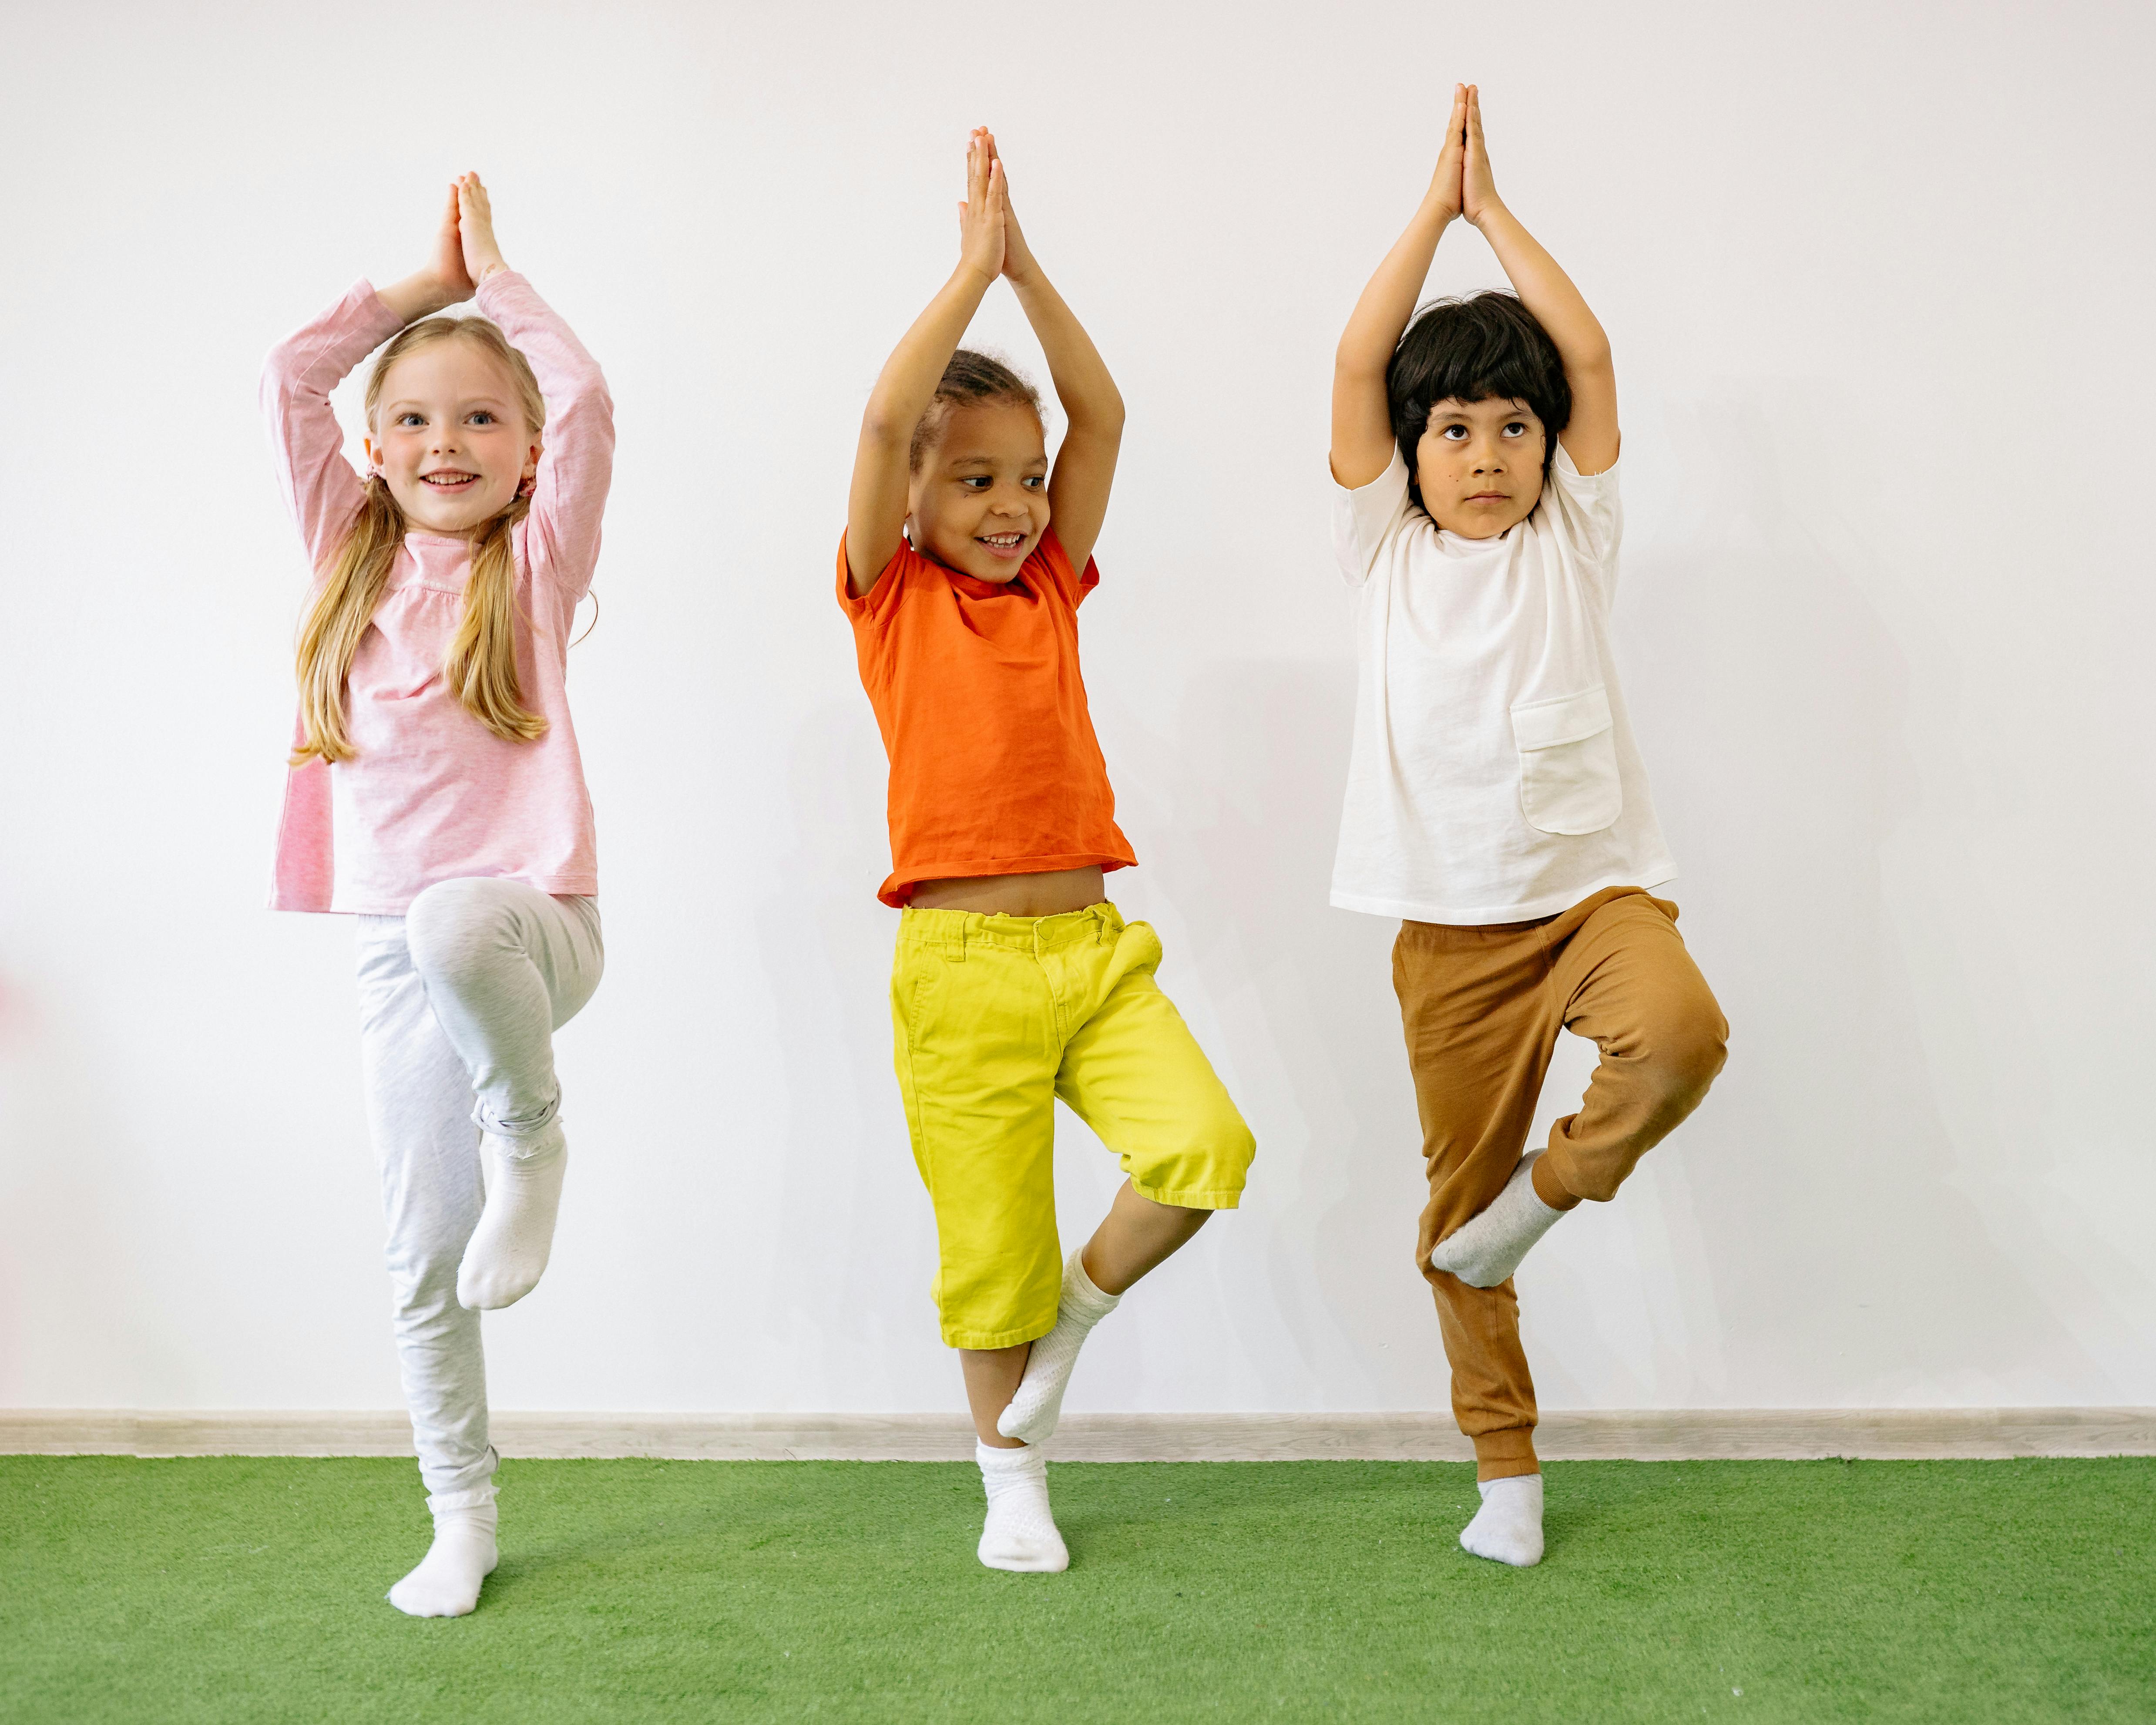 Three children performing a yoga or exercise pose